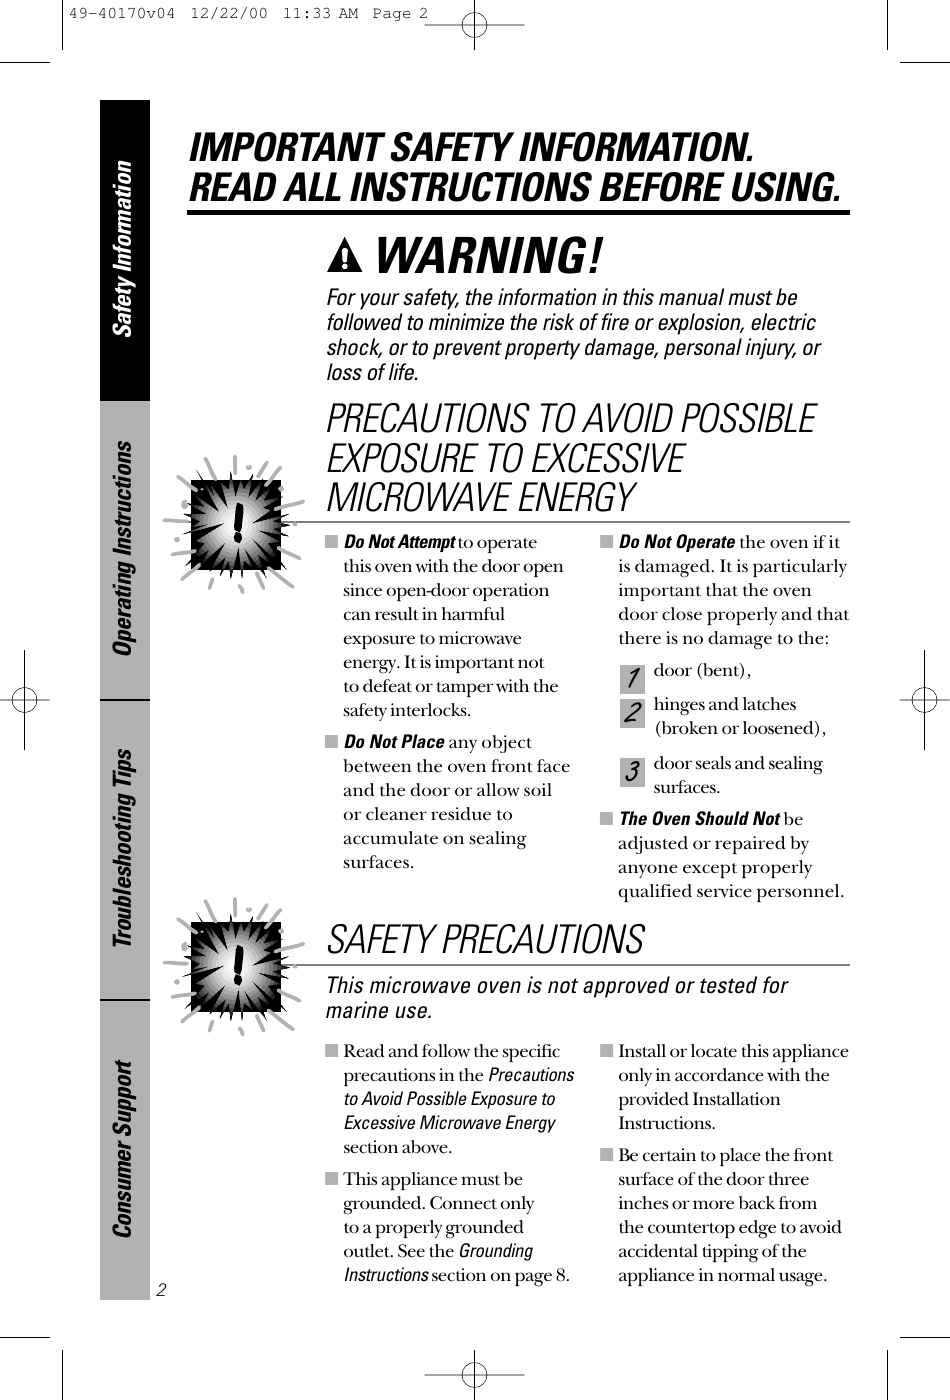 ■Read and follow the specificprecautions in the Precautionsto Avoid Possible Exposure toExcessive Microwave Energysection above.■This appliance must begrounded. Connect only to a properly groundedoutlet. See the GroundingInstructionssection on page 8.■Install or locate this applianceonly in accordance with theprovided InstallationInstructions.■Be certain to place the frontsurface of the door threeinches or more back from the countertop edge to avoidaccidental tipping of theappliance in normal usage.■Do Not Attemptto operate this oven with the door opensince open-door operationcan result in harmfulexposure to microwaveenergy. It is important not to defeat or tamper with thesafety interlocks.■Do Not Place any objectbetween the oven front faceand the door or allow soilor cleaner residue toaccumulate on sealingsurfaces.■Do Not Operate the oven if itis damaged. It is particularlyimportant that the ovendoor close properly and thatthere is no damage to the:door (bent),hinges and latches (broken or loosened),door seals and sealingsurfaces.■The Oven Should Not beadjusted or repaired byanyone except properlyqualified service personnel.321PRECAUTIONS TO AVOID POSSIBLEEXPOSURE TO EXCESSIVEMICROWAVE ENERGYSafety InformationOperating InstructionsTroubleshooting TipsConsumer SupportIMPORTANT SAFETY INFORMATION.READ ALL INSTRUCTIONS BEFORE USING.2For your safety, the information in this manual must befollowed to minimize the risk of fire or explosion, electricshock, or to prevent property damage, personal injury, or loss of life.WARNING! This microwave oven is not approved or tested formarine use.SAFETY PRECAUTIONS49-40170v04  12/22/00  11:33 AM  Page 2